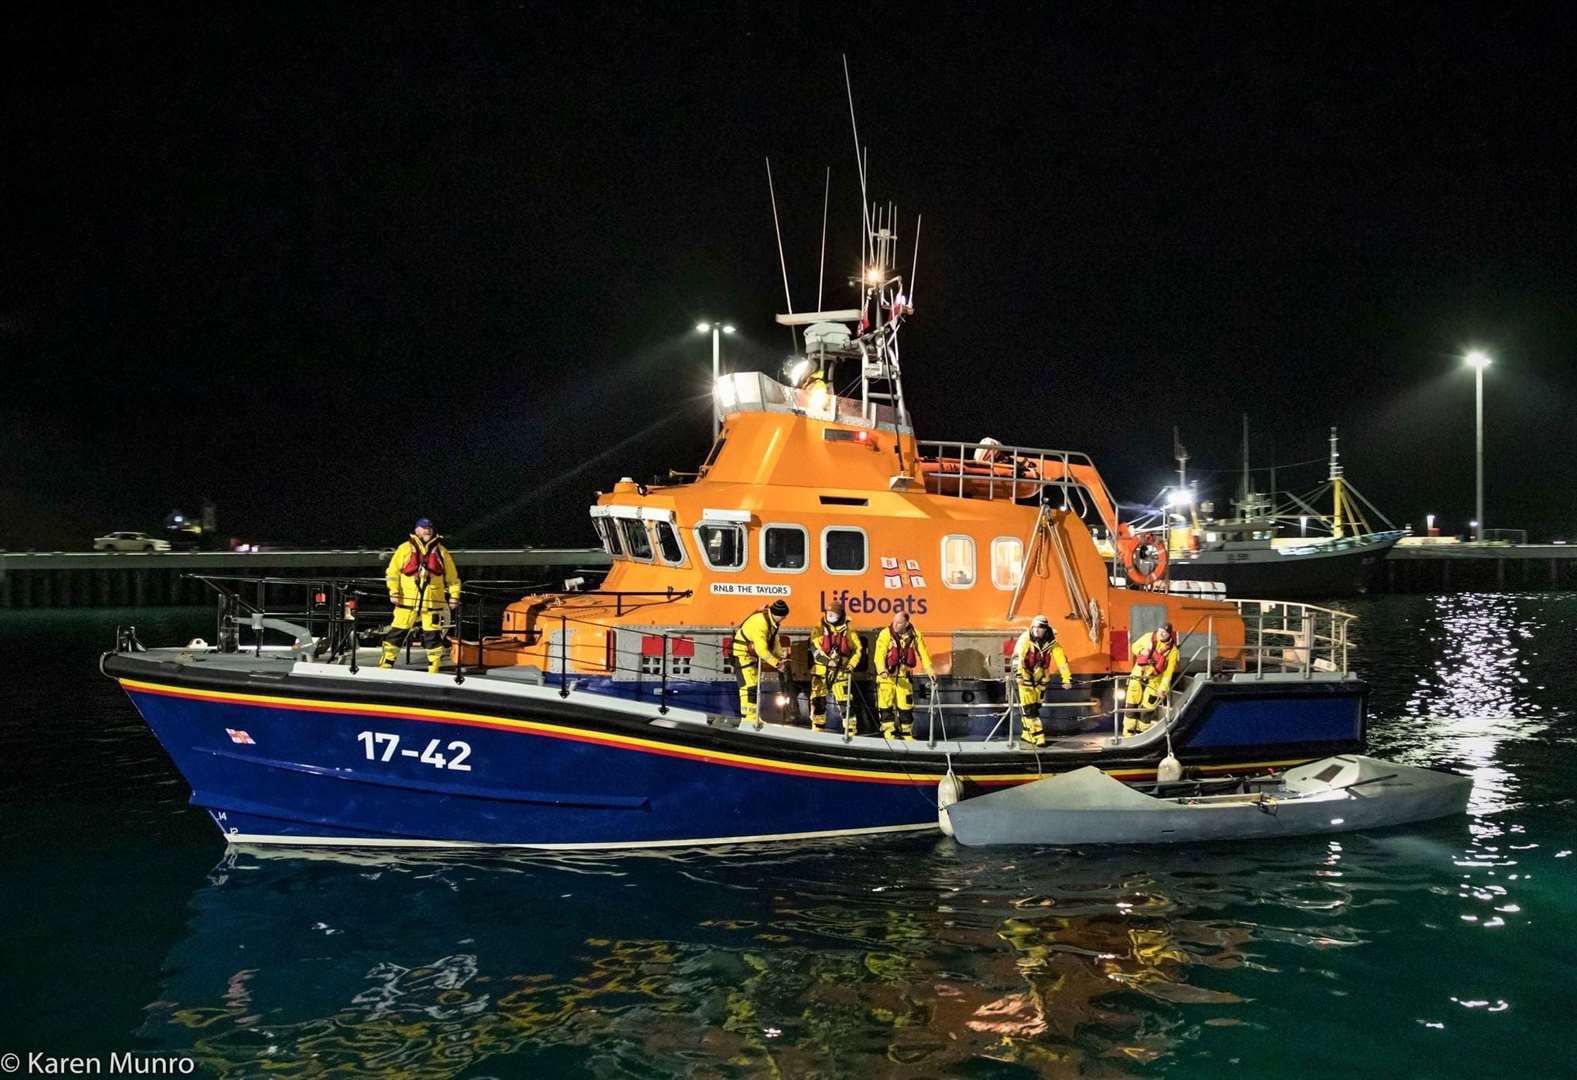 The rescued Atlantic-type vessel can be seen strapped to The Taylors as it arrived in Scrabster last night (Thursday). Picture: Karen Munro